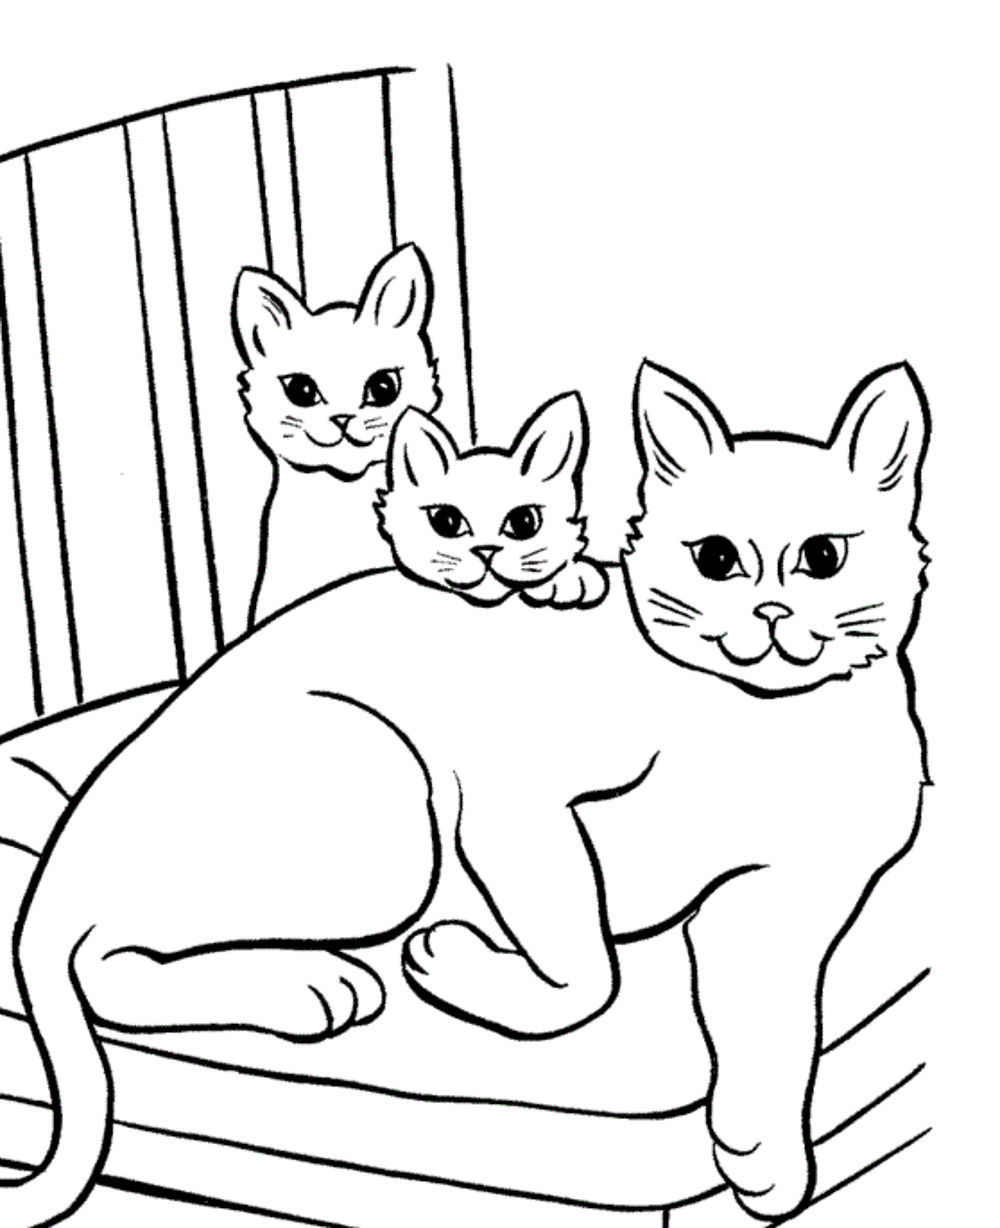 Download cat-printable-coloring-pages | | BestAppsForKids.com